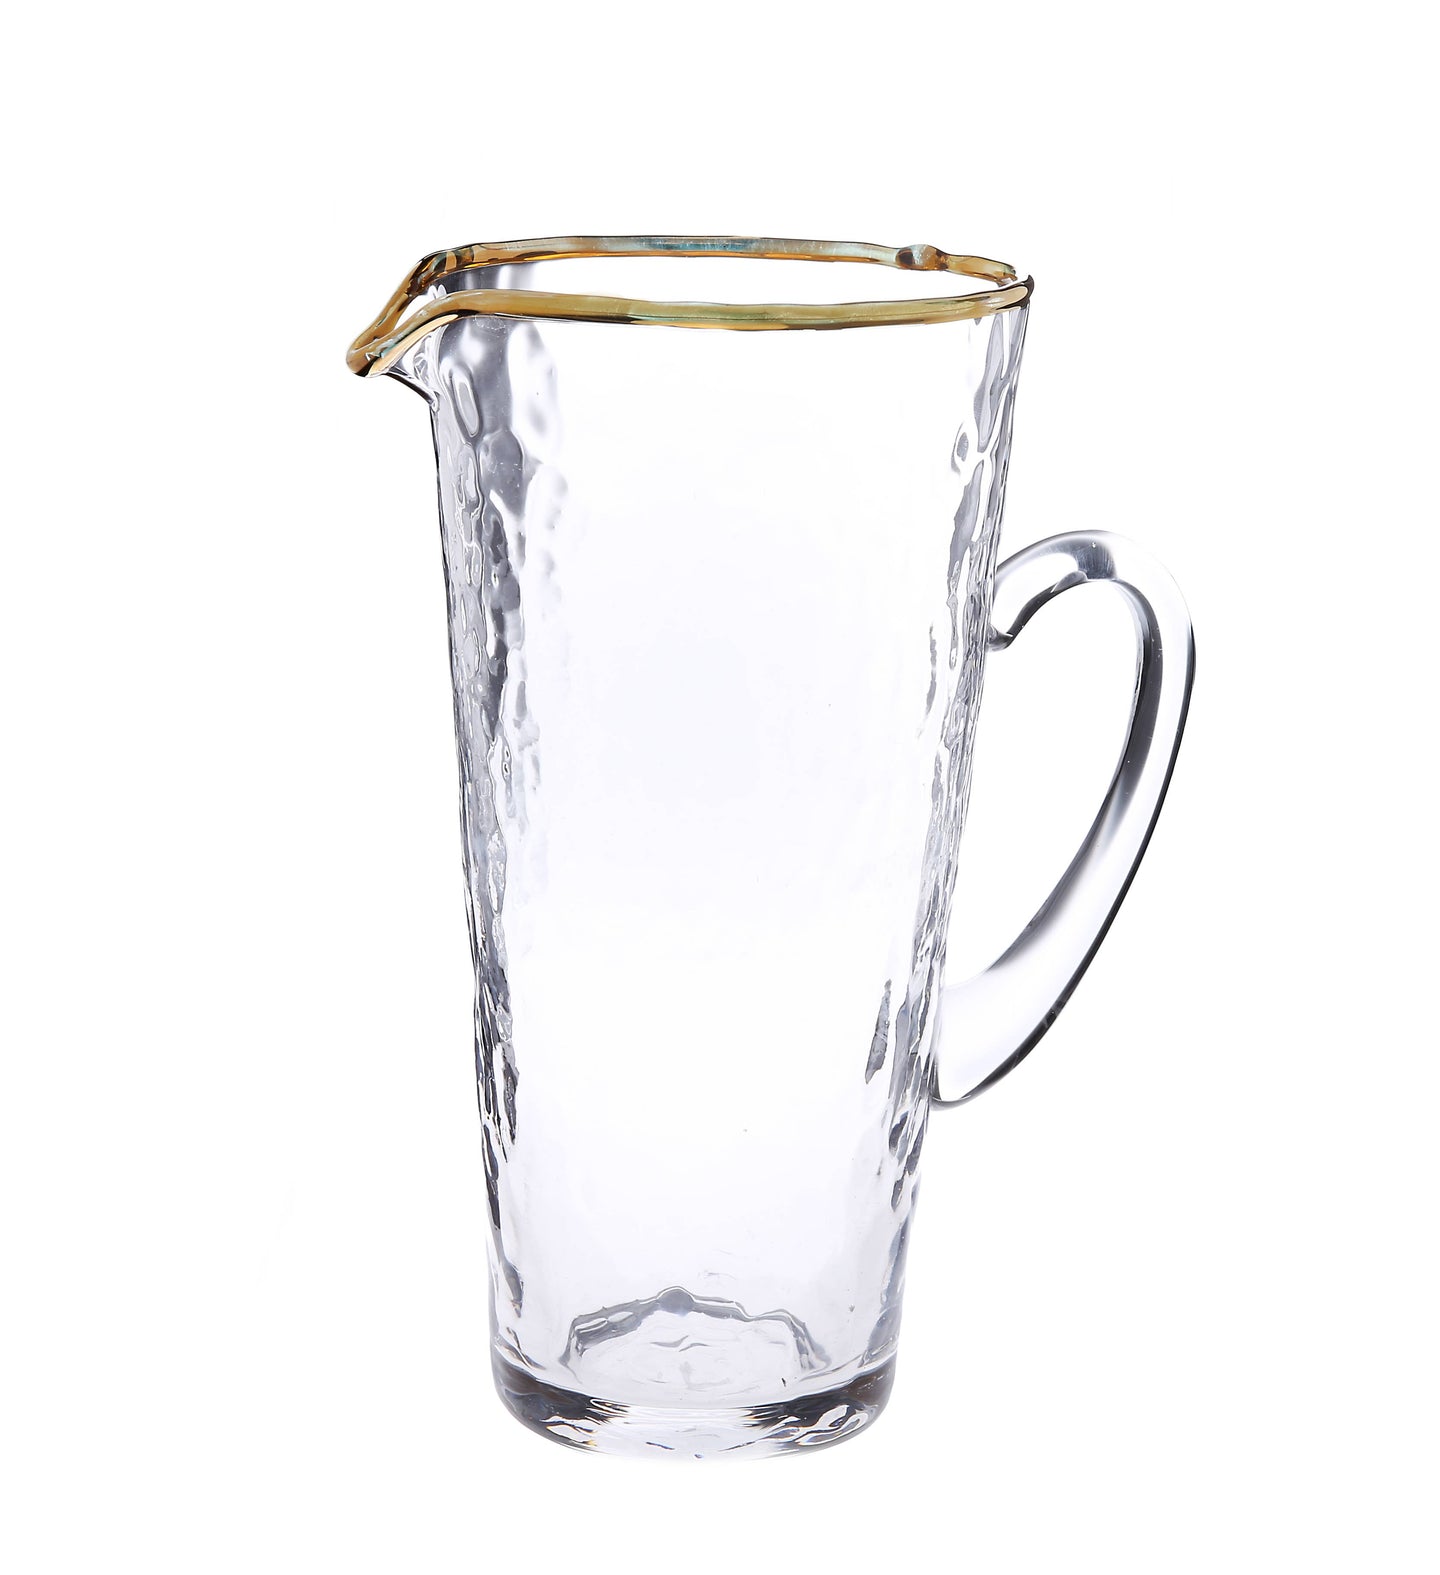 Pebble Glass Pitcher with Gold Rim